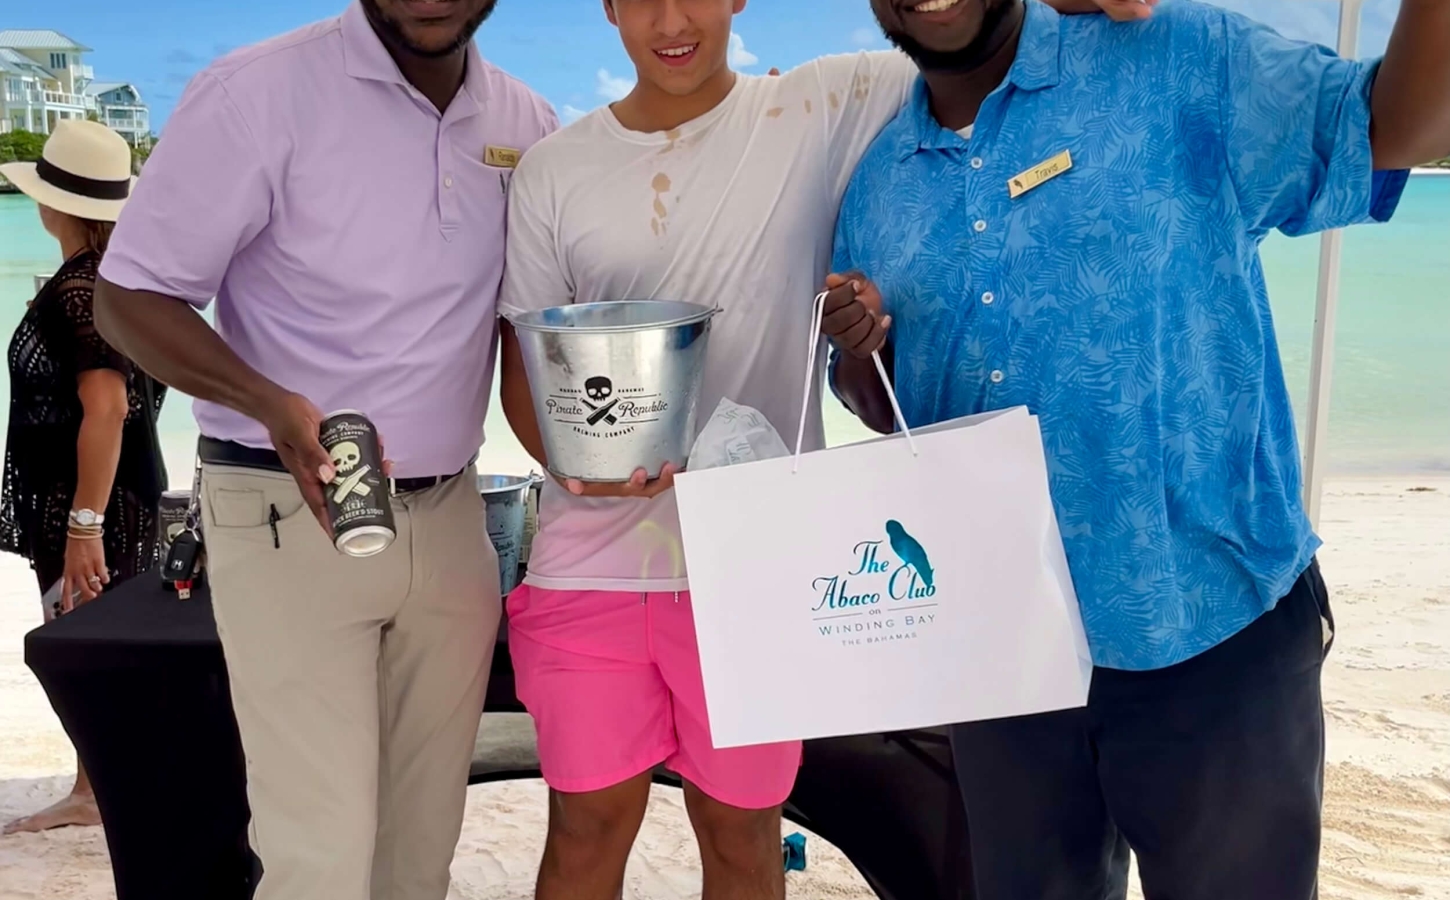 The Abaco Club staff and a Club member smiling and showcasing club community and coastal lifestyle